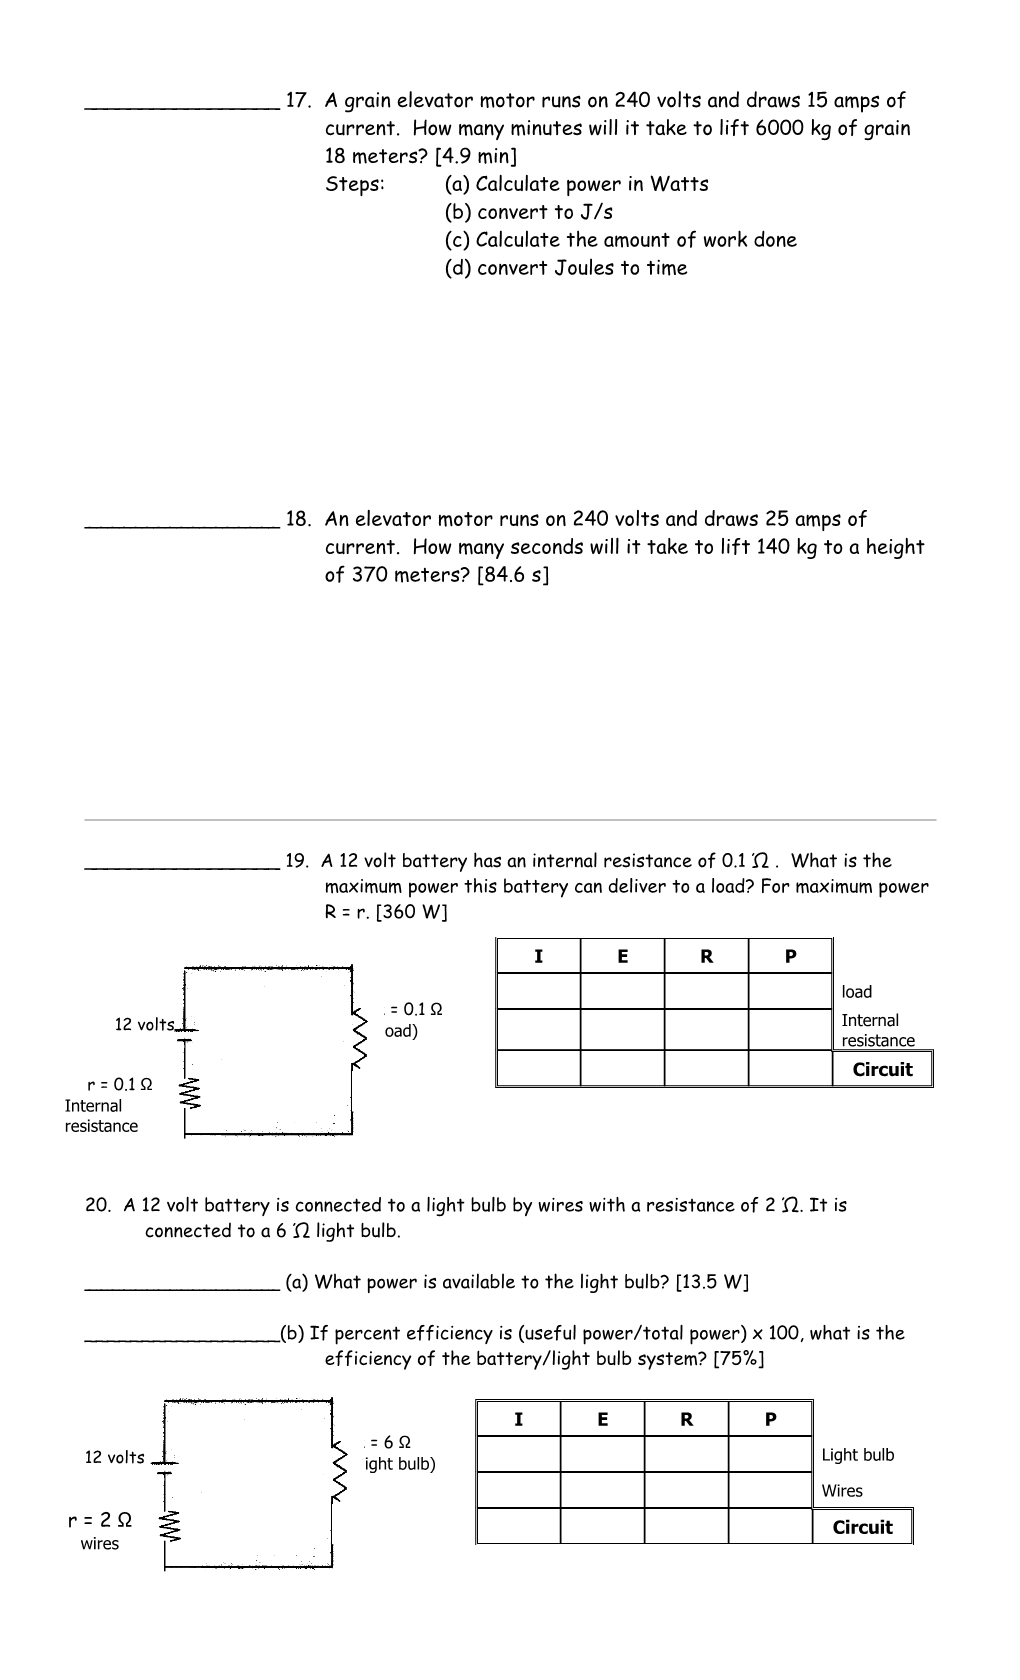 CW 13: Electric Power Practice Test